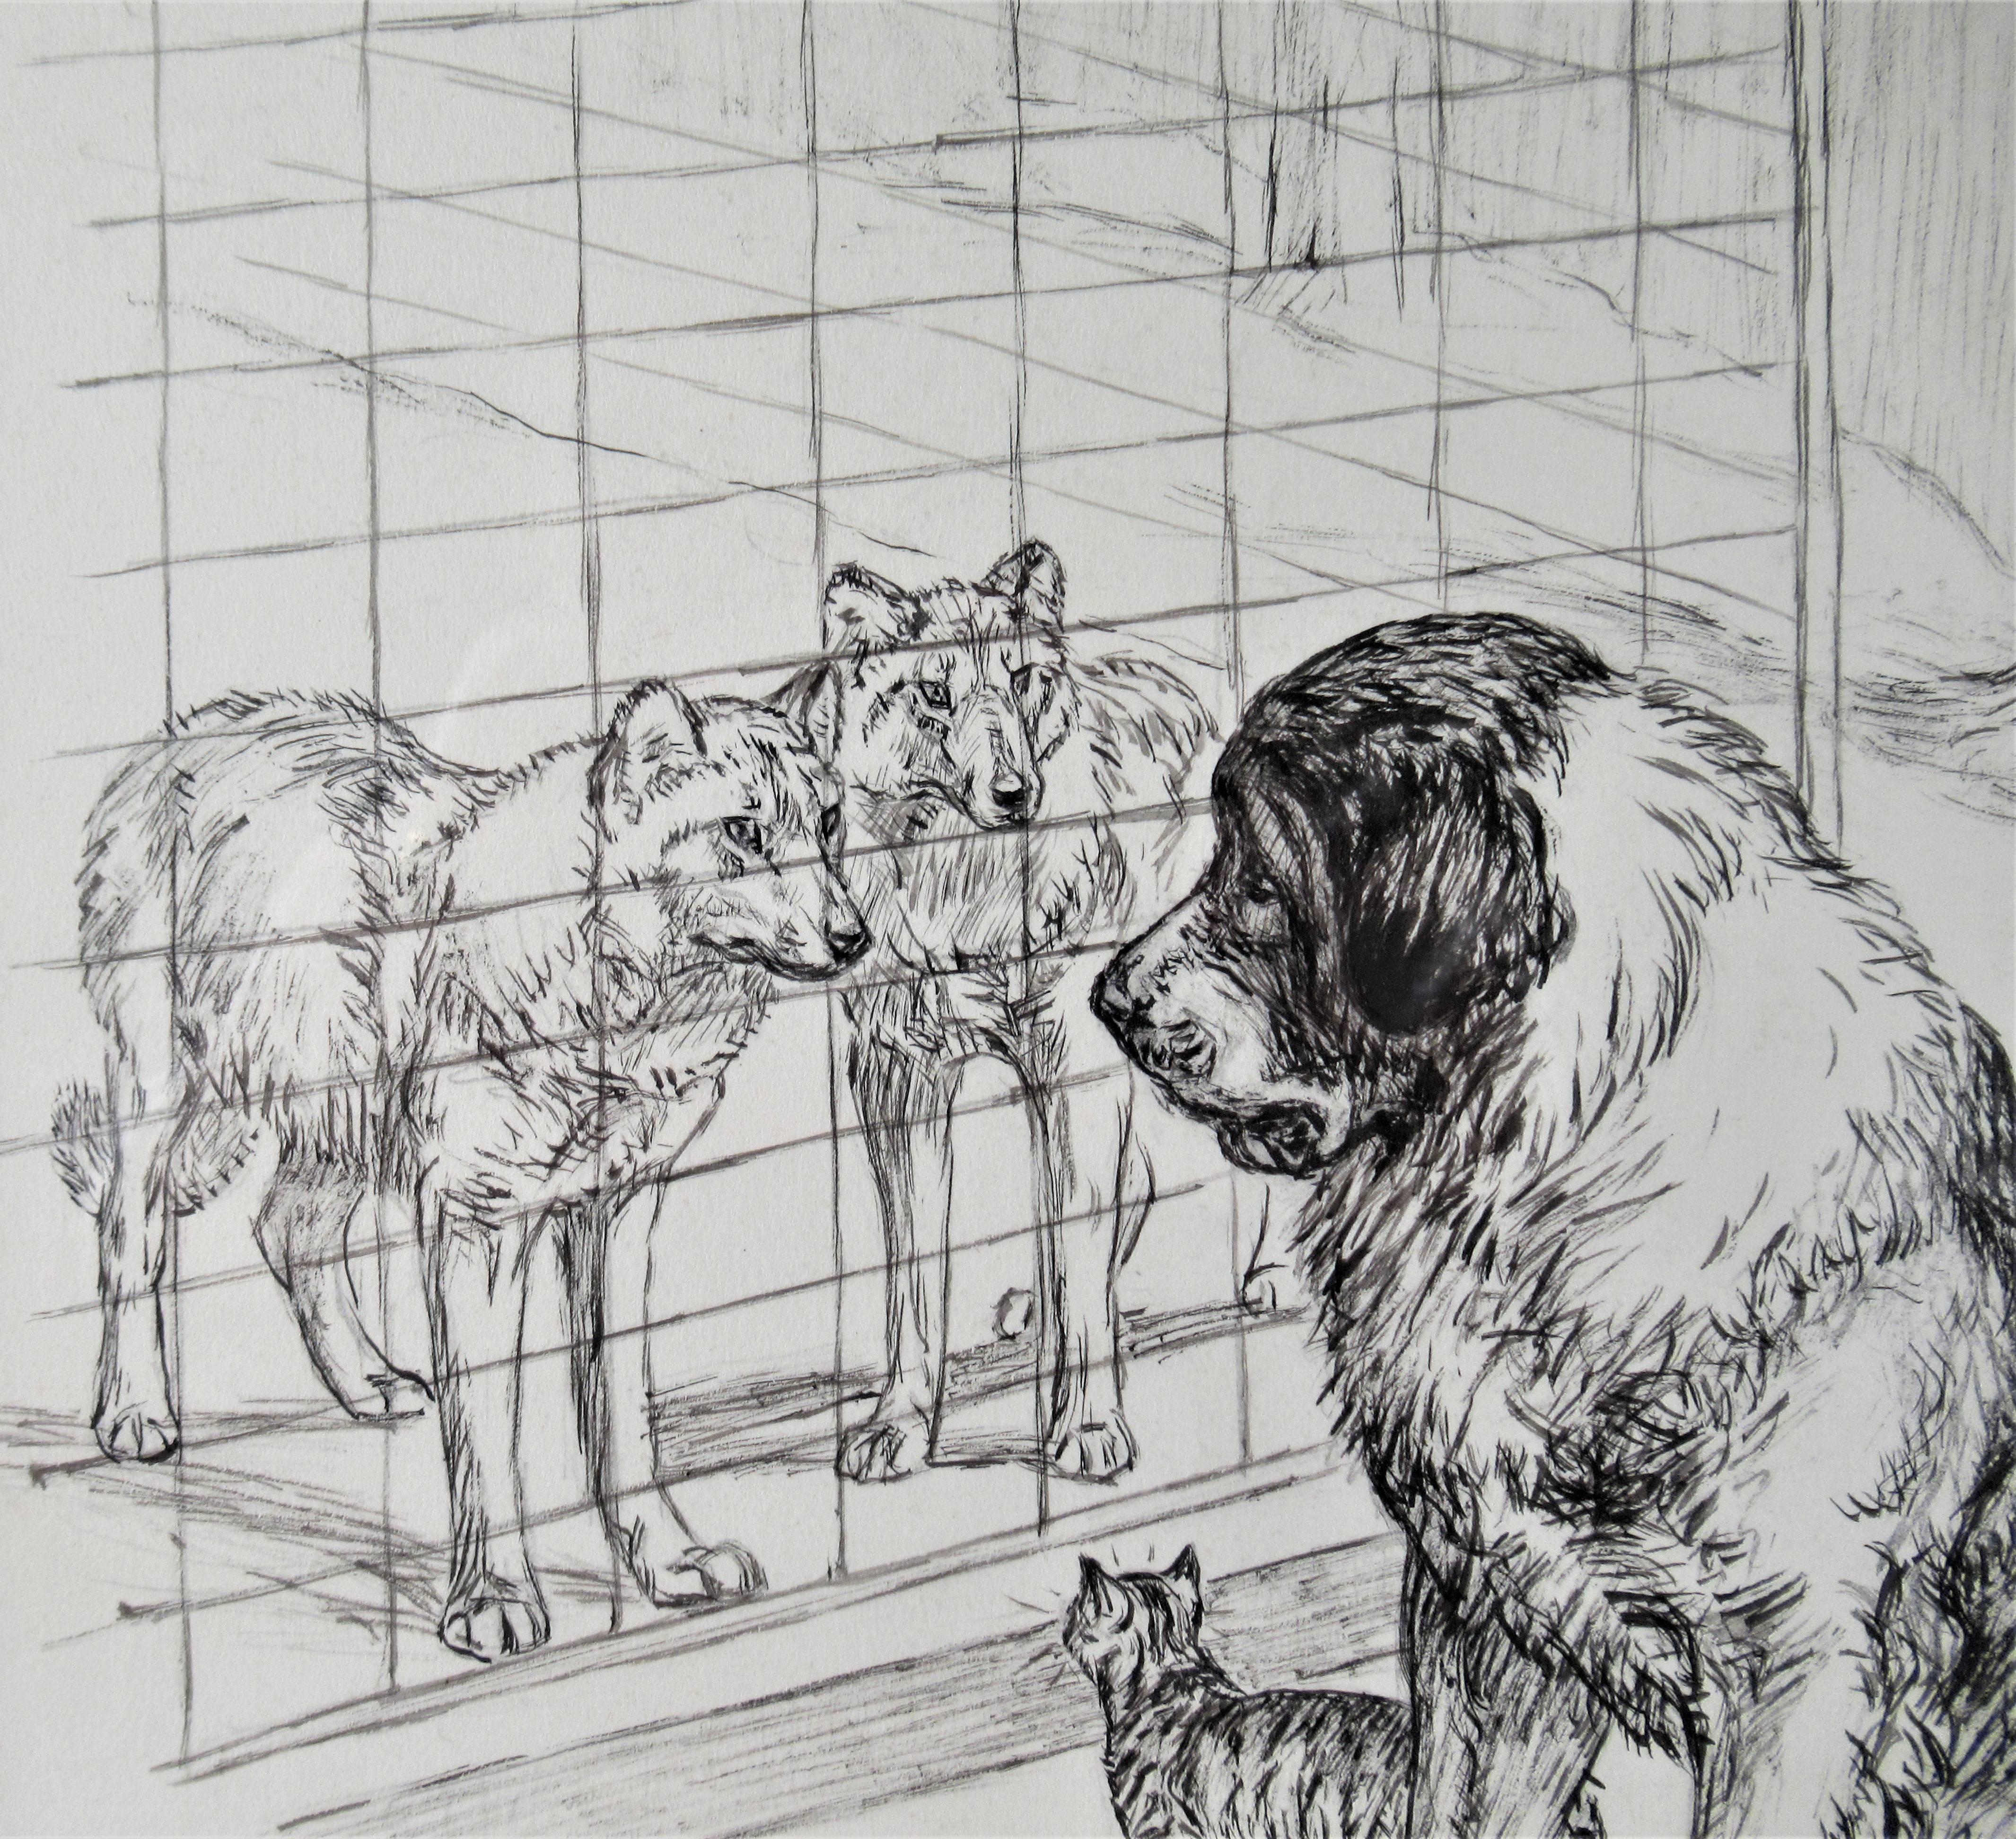  Dogs and Cat Looking at Each Other - Realist Art by Margaret Sweet Johnson